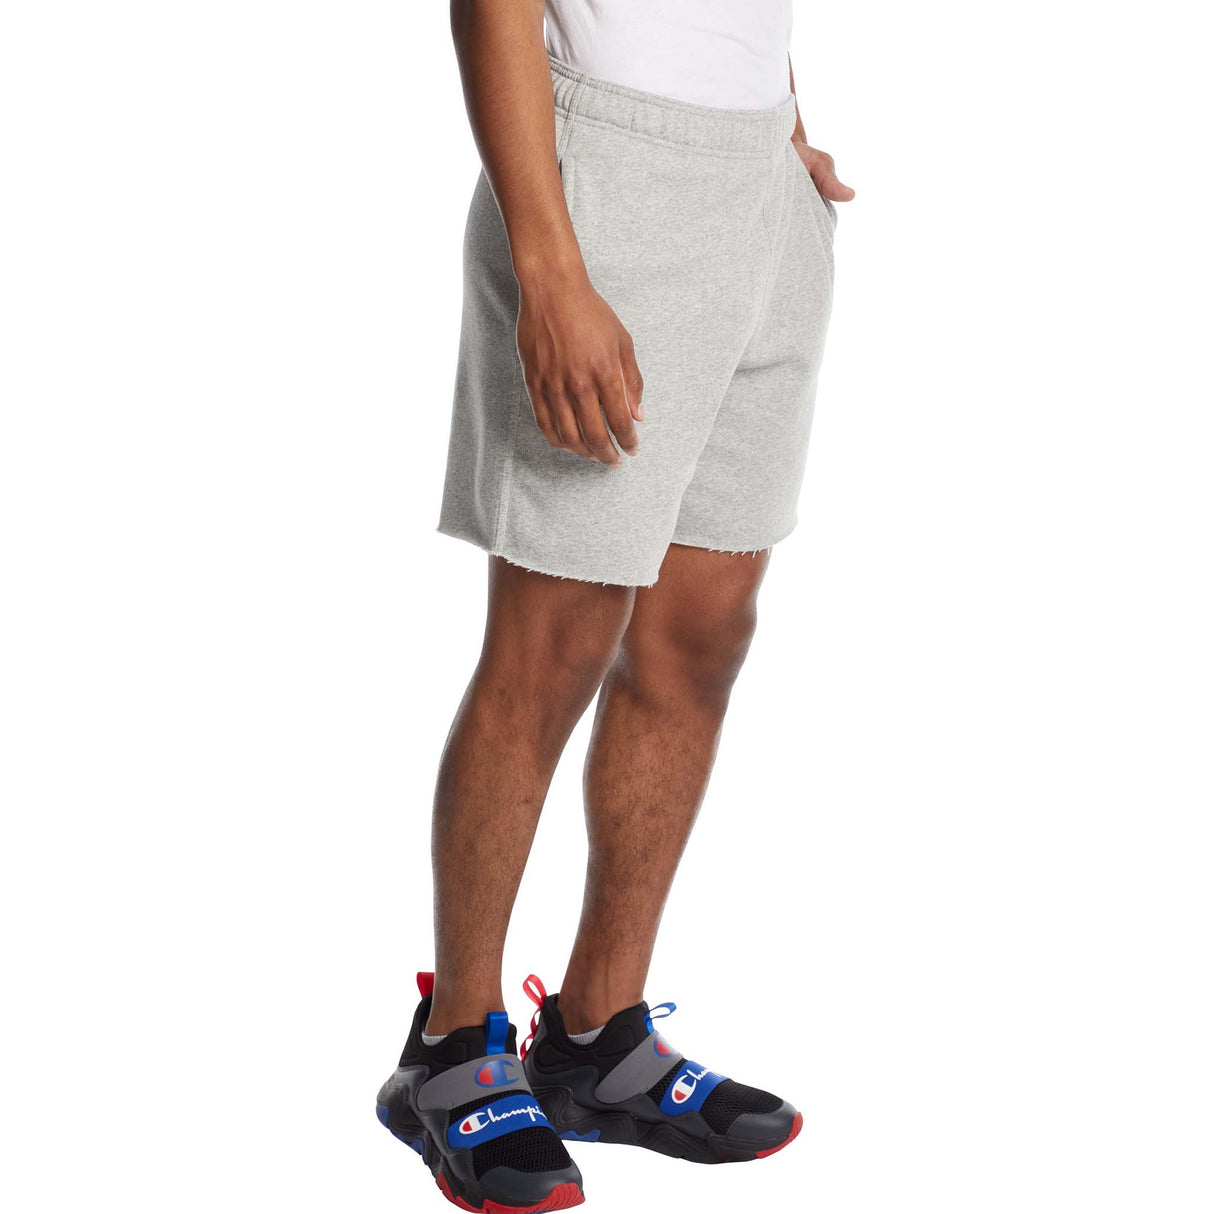 Champion 7-Inch Powerblend Fleece Short gris oxford homme lateral